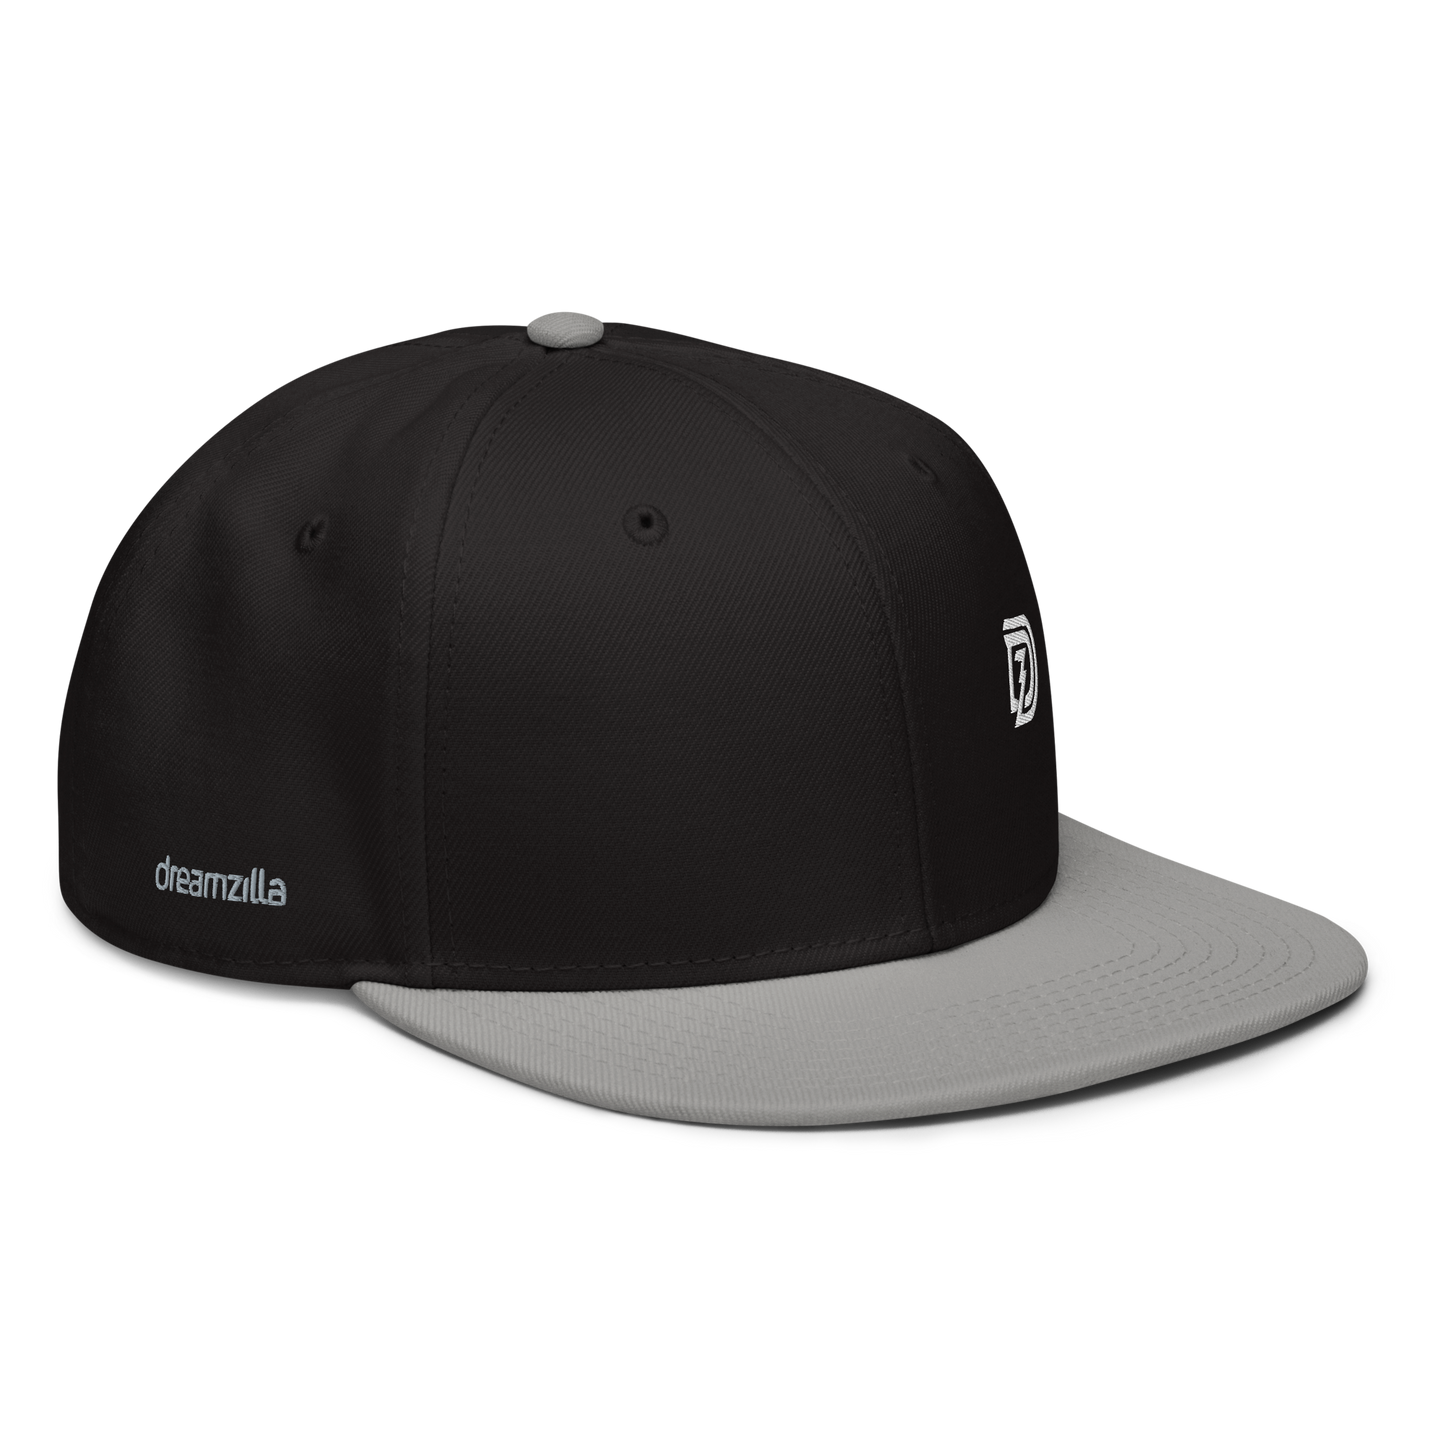 Angled View of DZ Monochrome Snapback in Black with Gray Brim